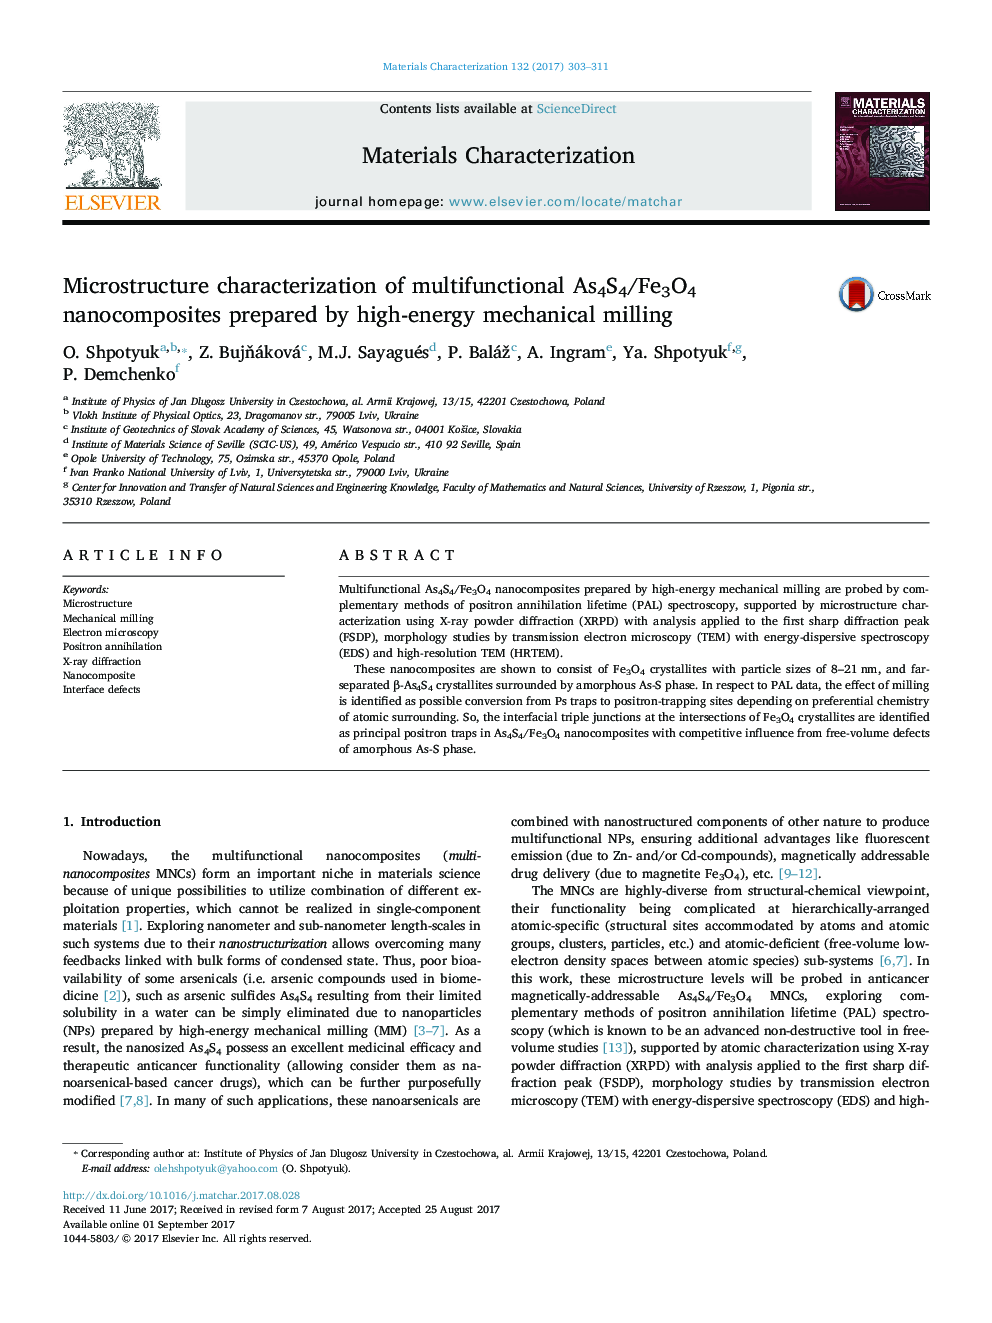 Microstructure characterization of multifunctional As4S4/Fe3O4 nanocomposites prepared by high-energy mechanical milling